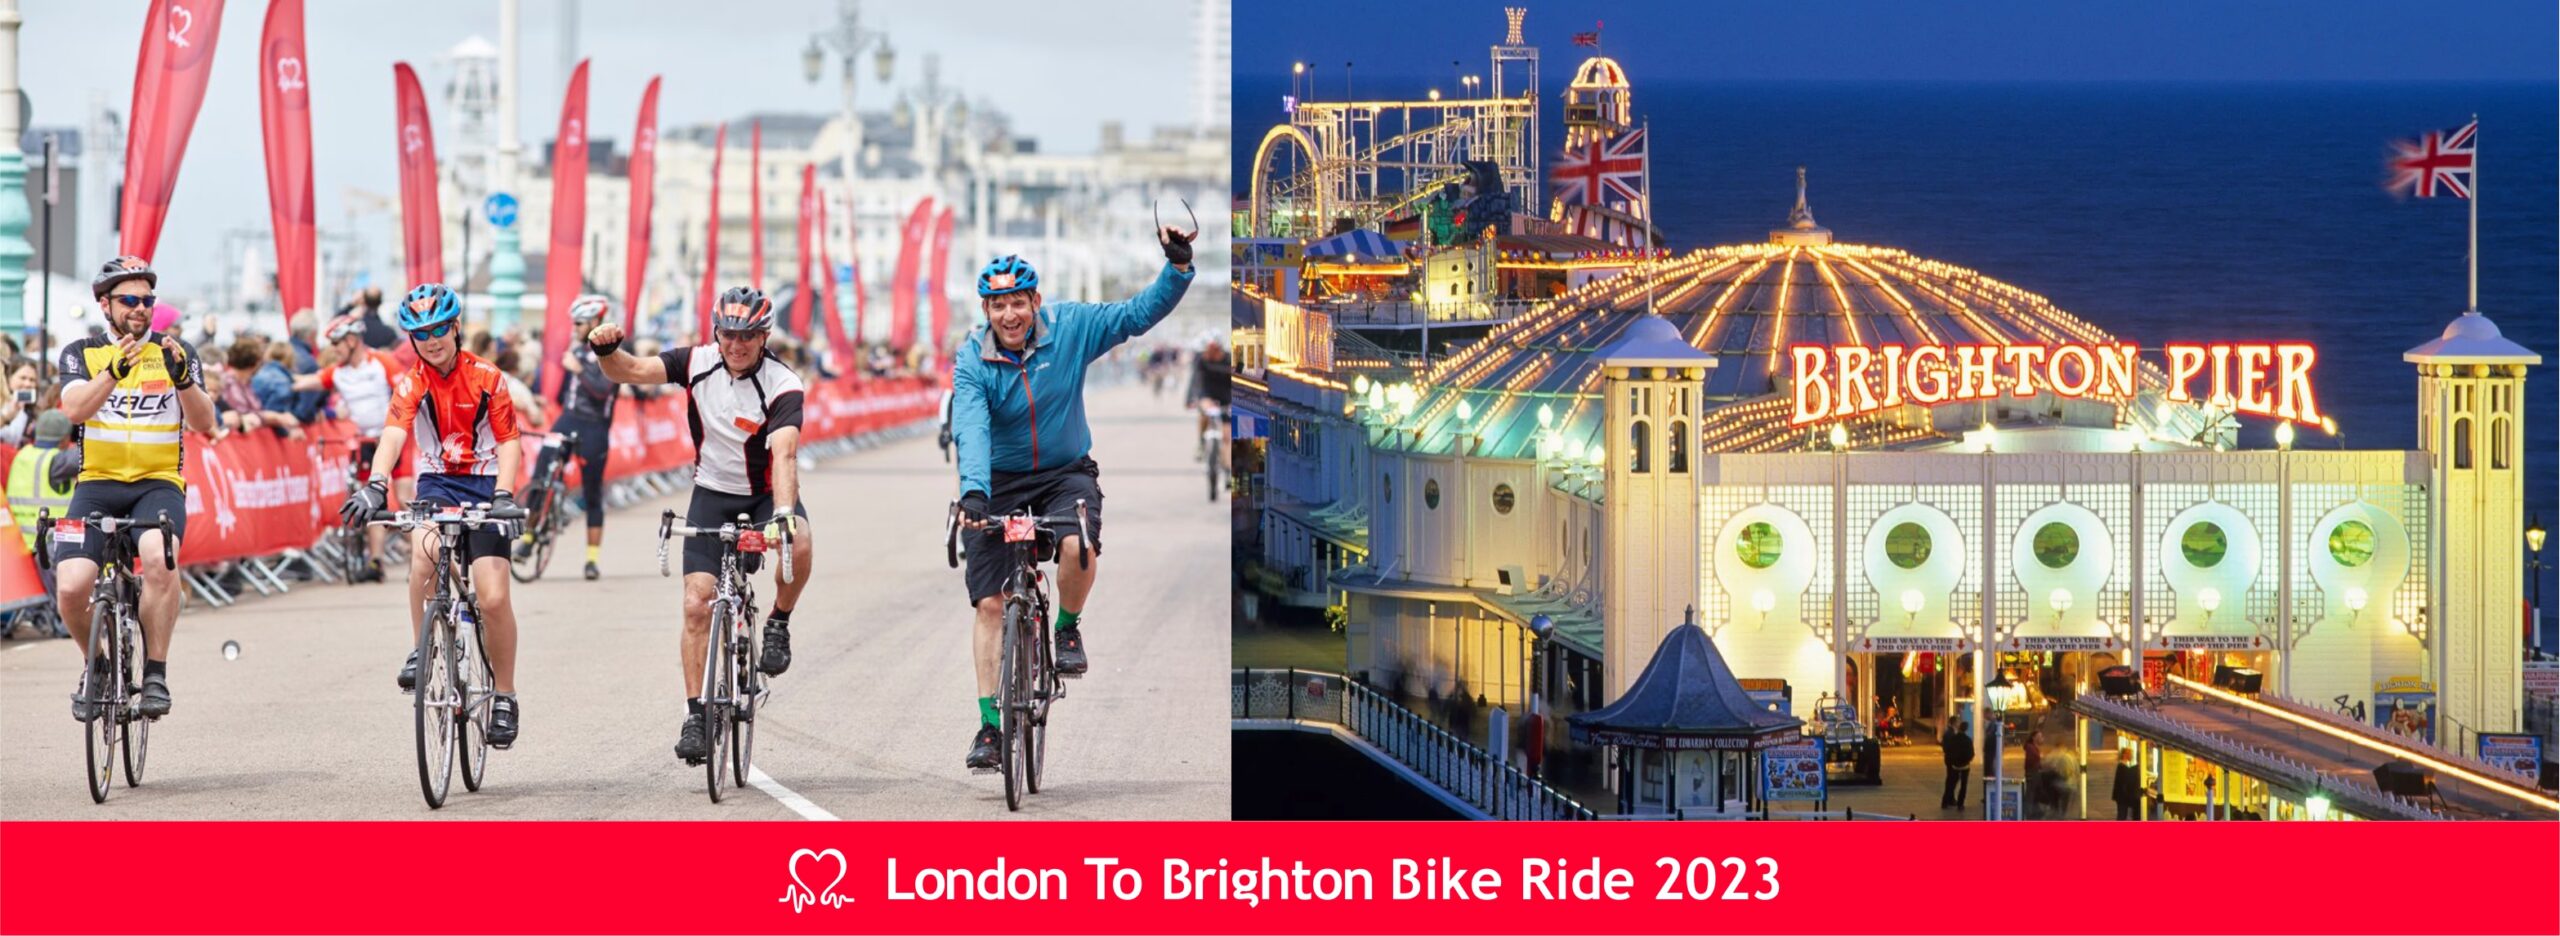 london to bright bike ride for get kids going!